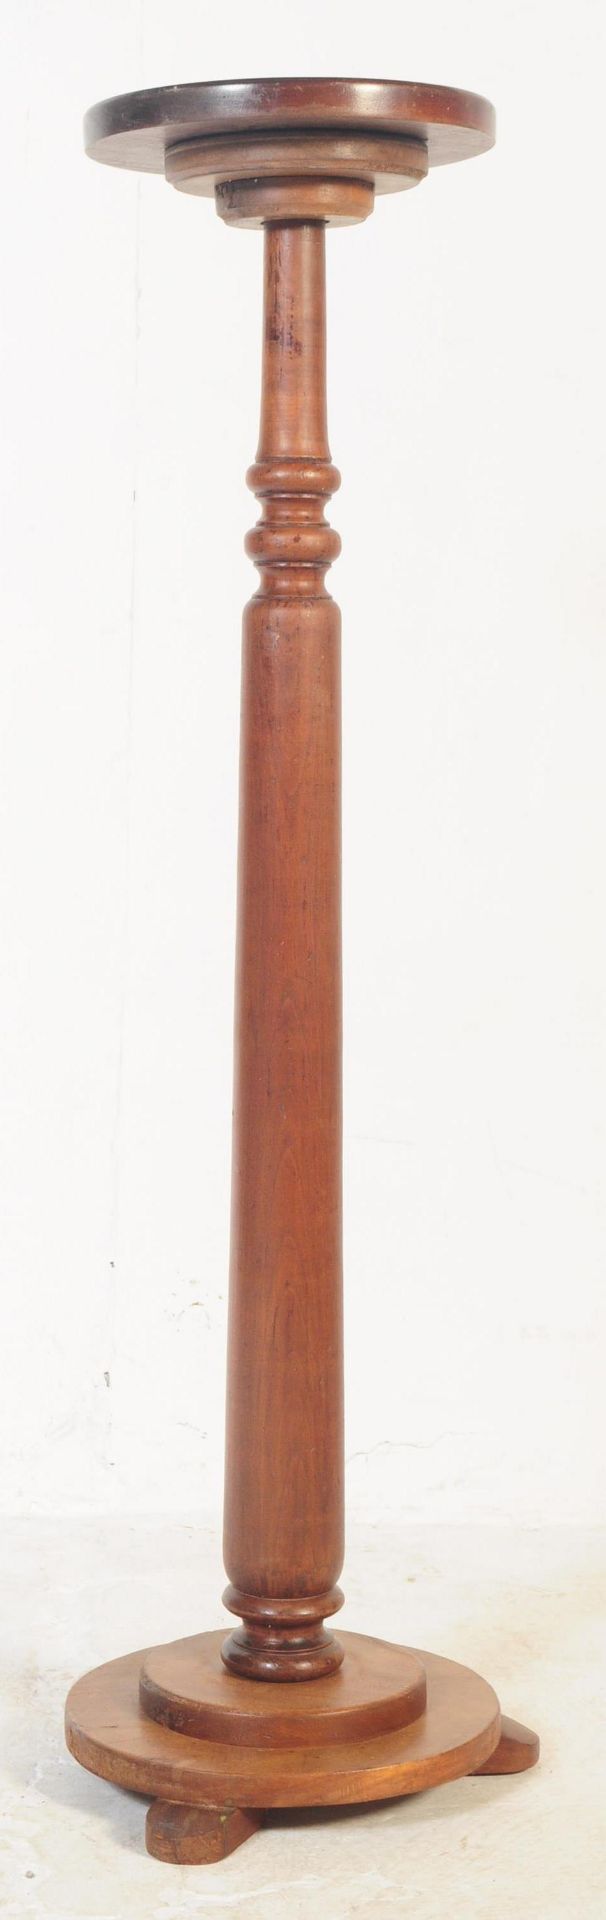 LARGE EARLY 20TH CENTURY OAK FLOOR STANDING PLANT STANT